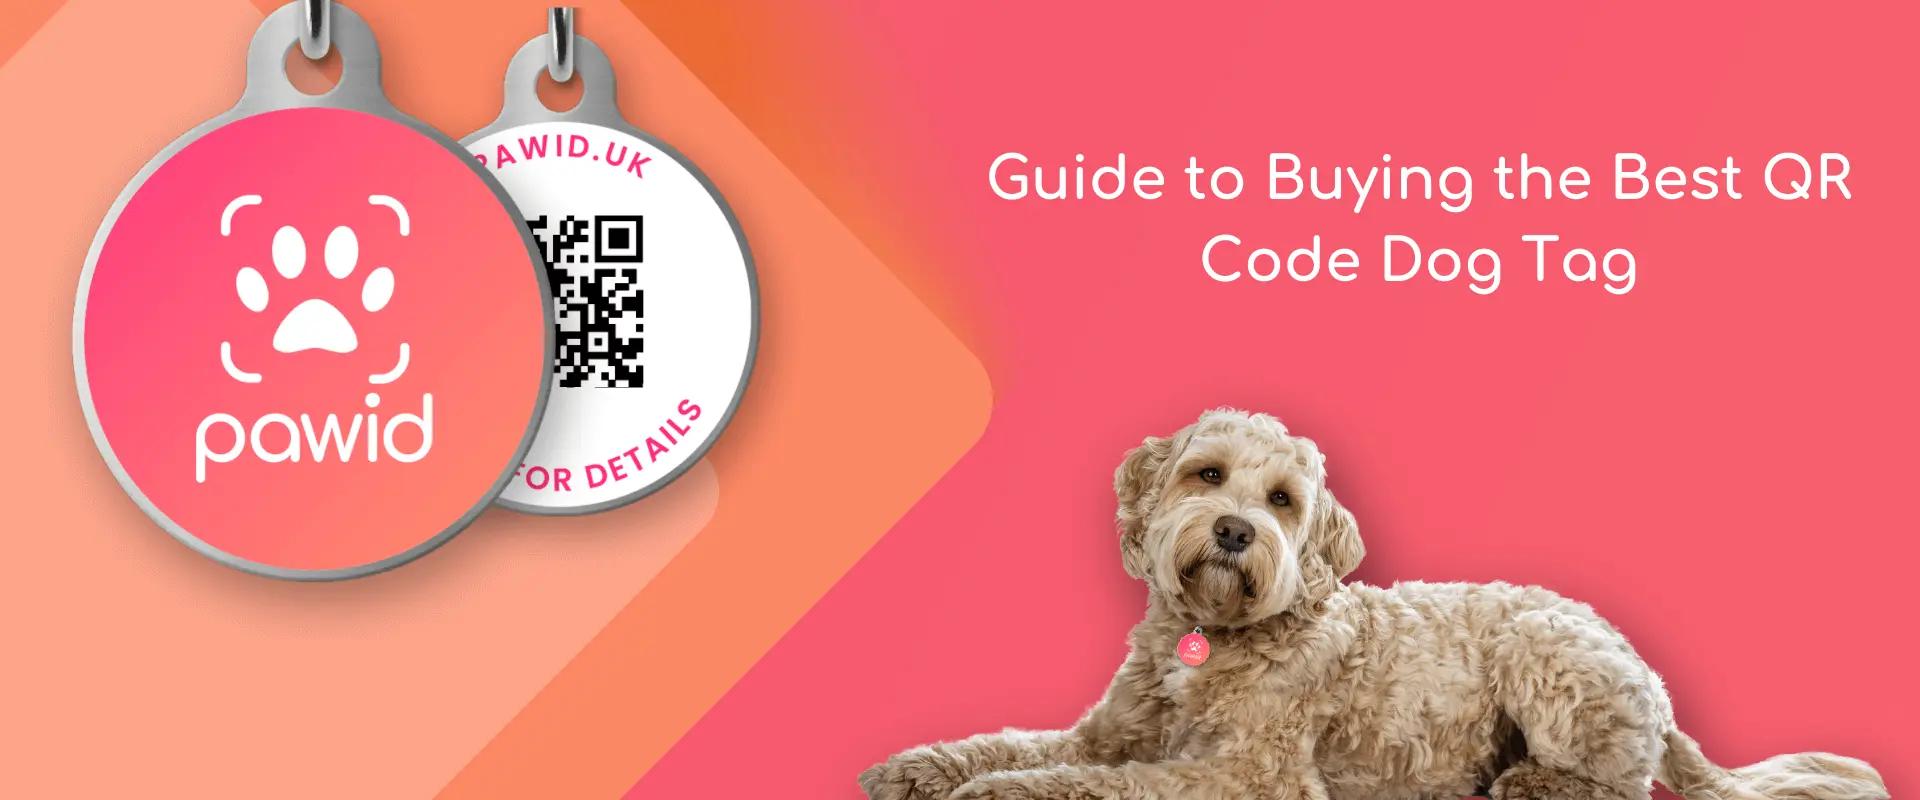 Guide to Buying the Best QR Code Dog Tag